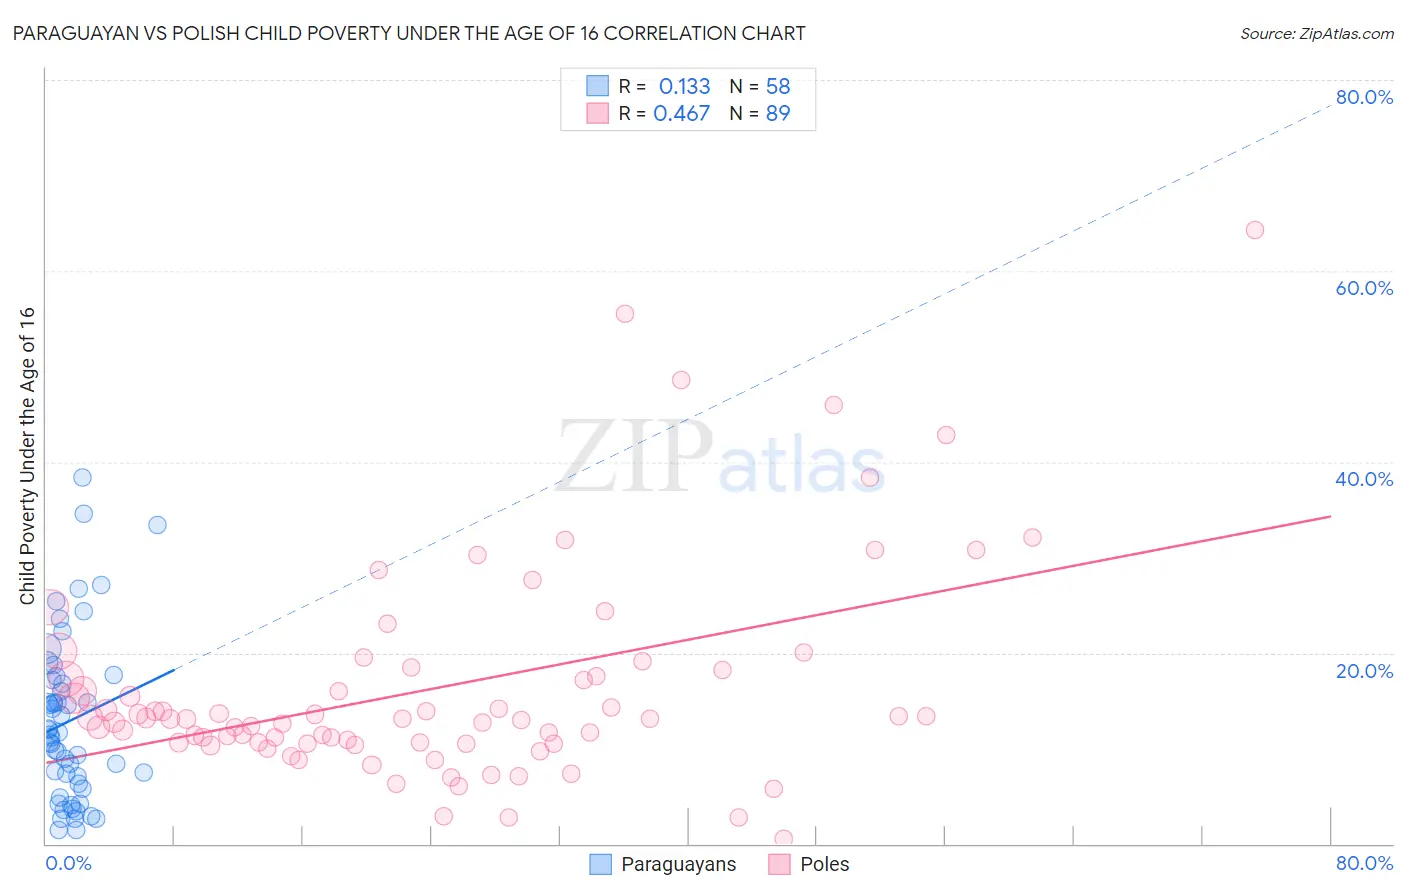 Paraguayan vs Polish Child Poverty Under the Age of 16